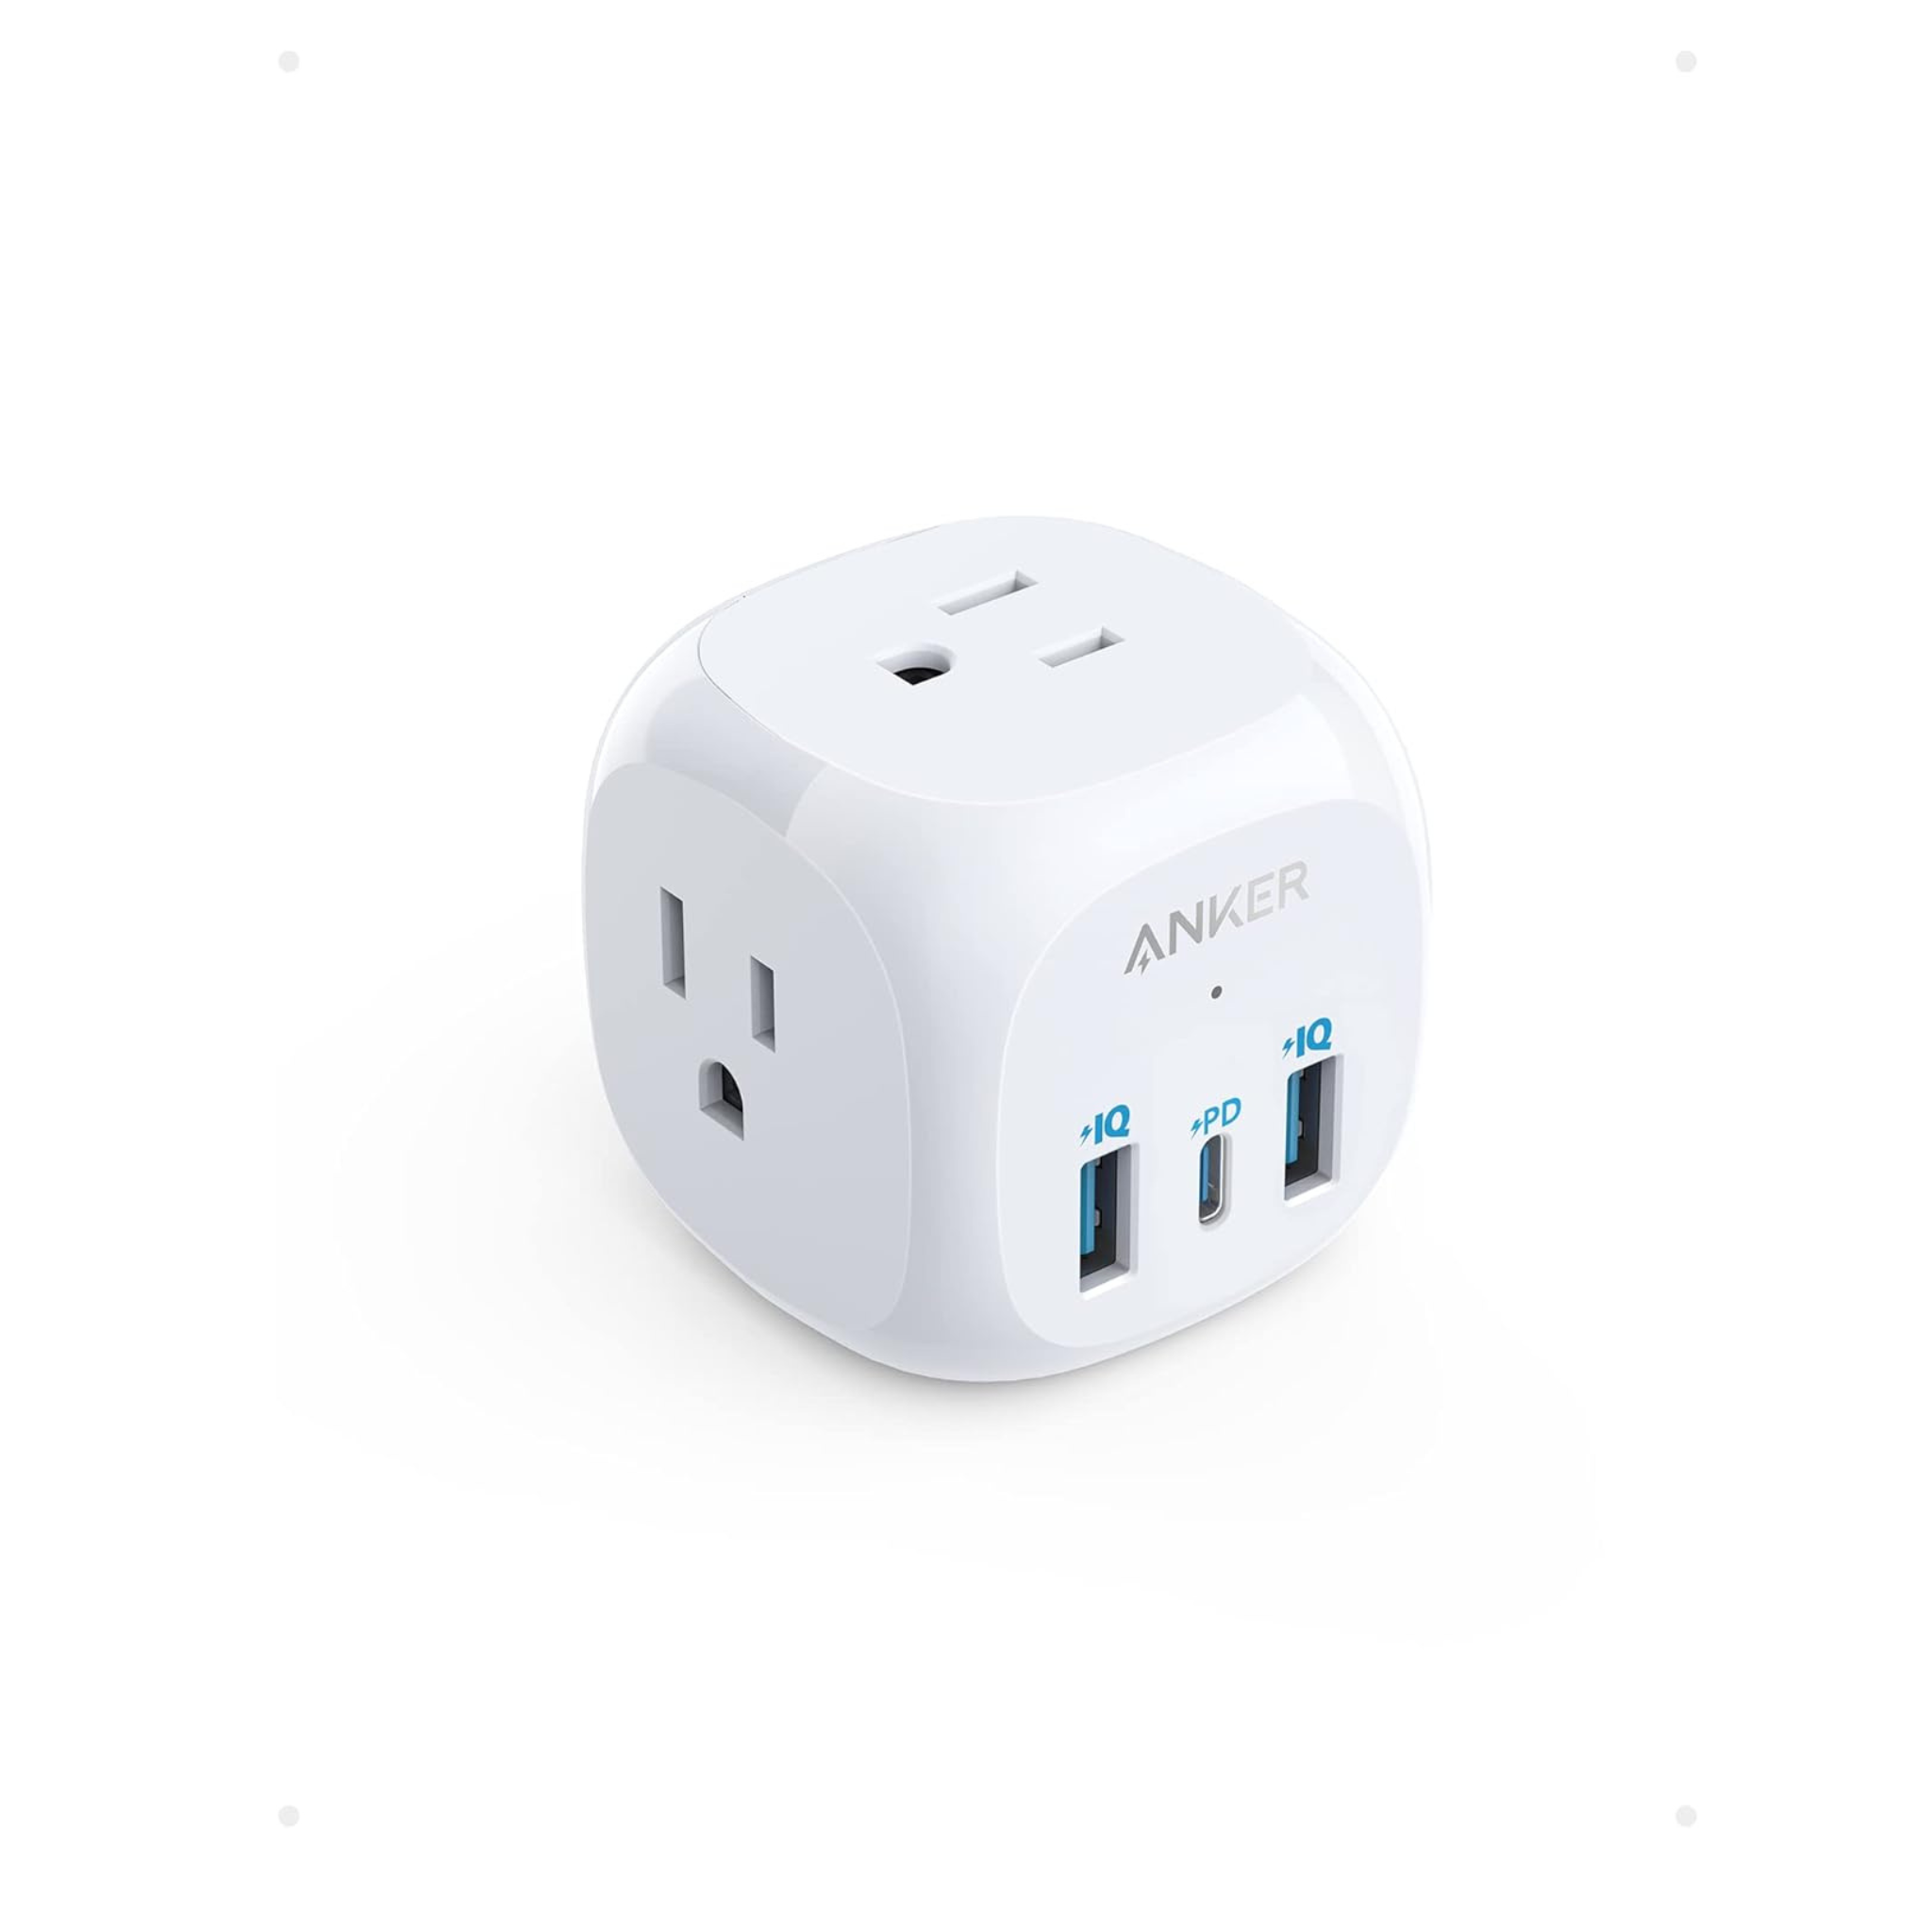 Anker 321 20W Outlet Extender w/3 Outlets, 2 USB-A & 1 USB-C Ports